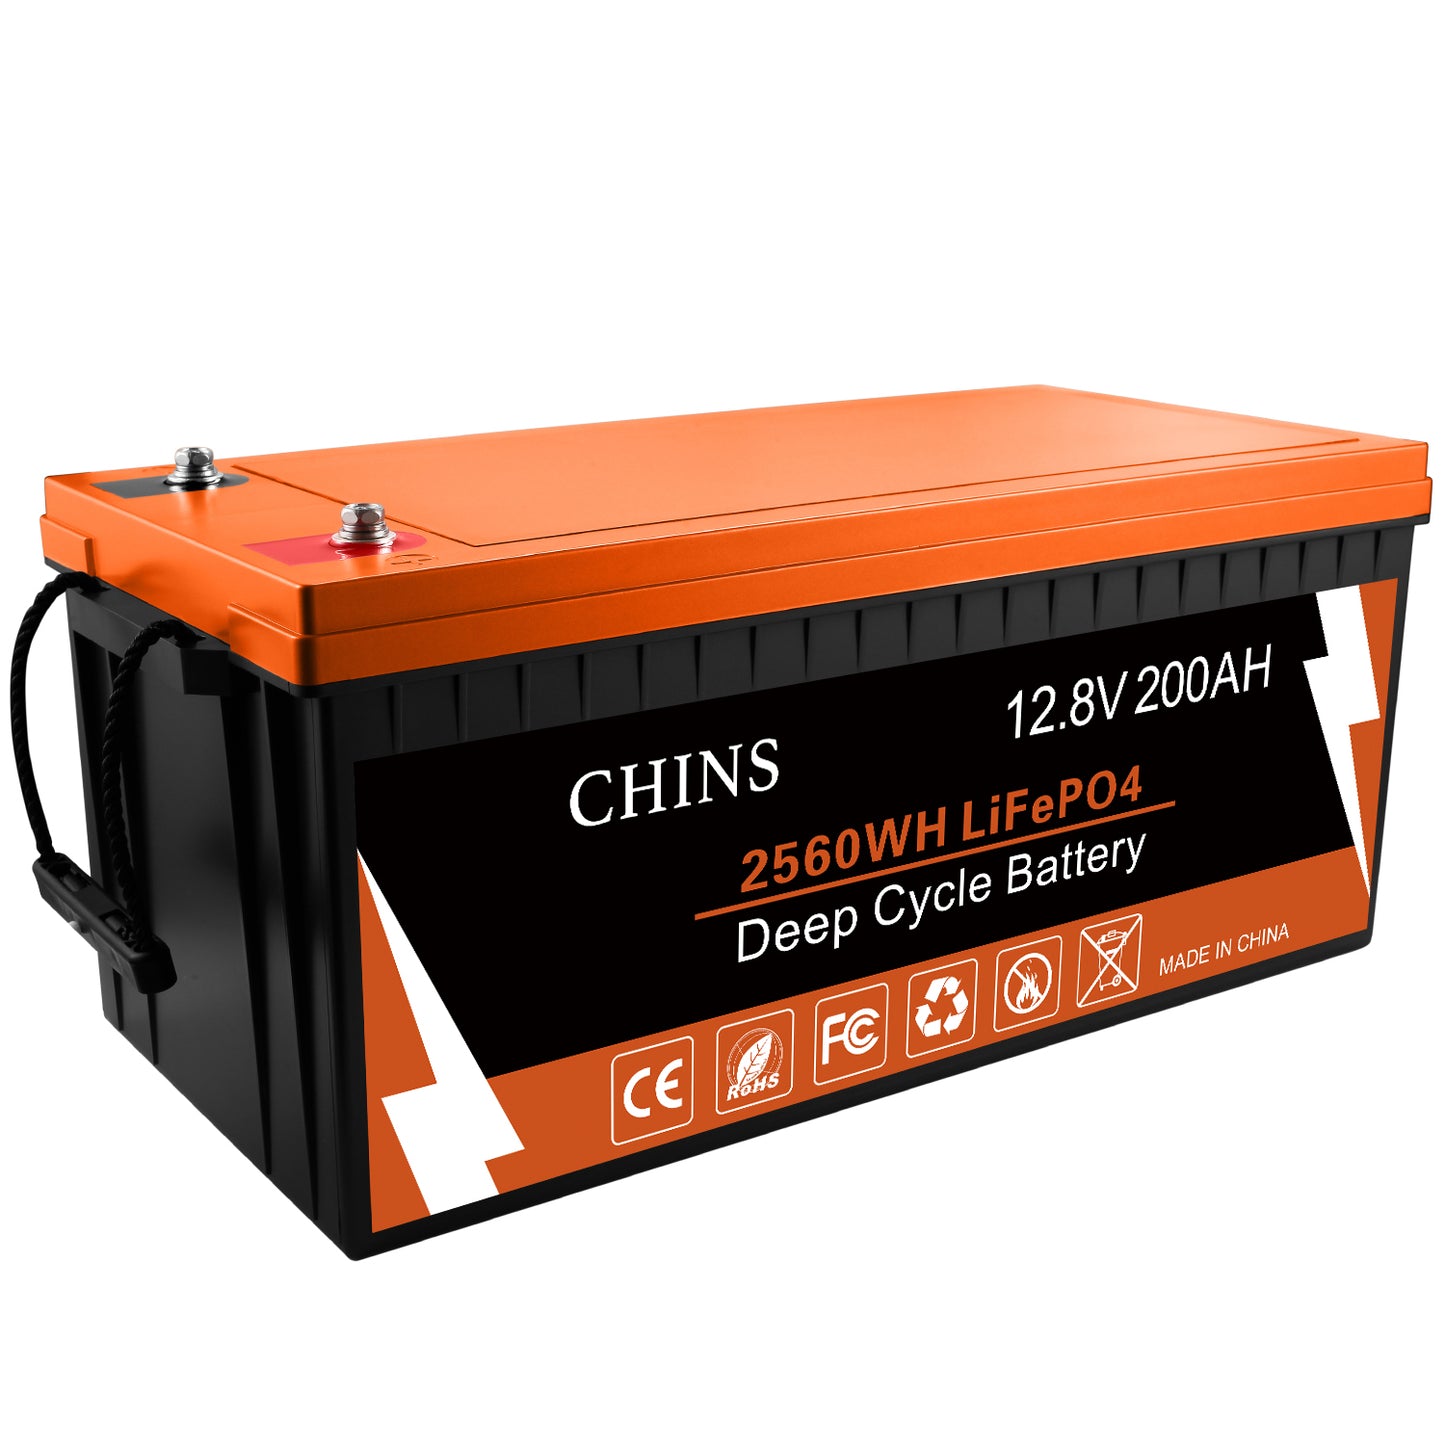 24V 200Ah LiFePO4 Lithium Battery, Built-in 100A Smart BMS